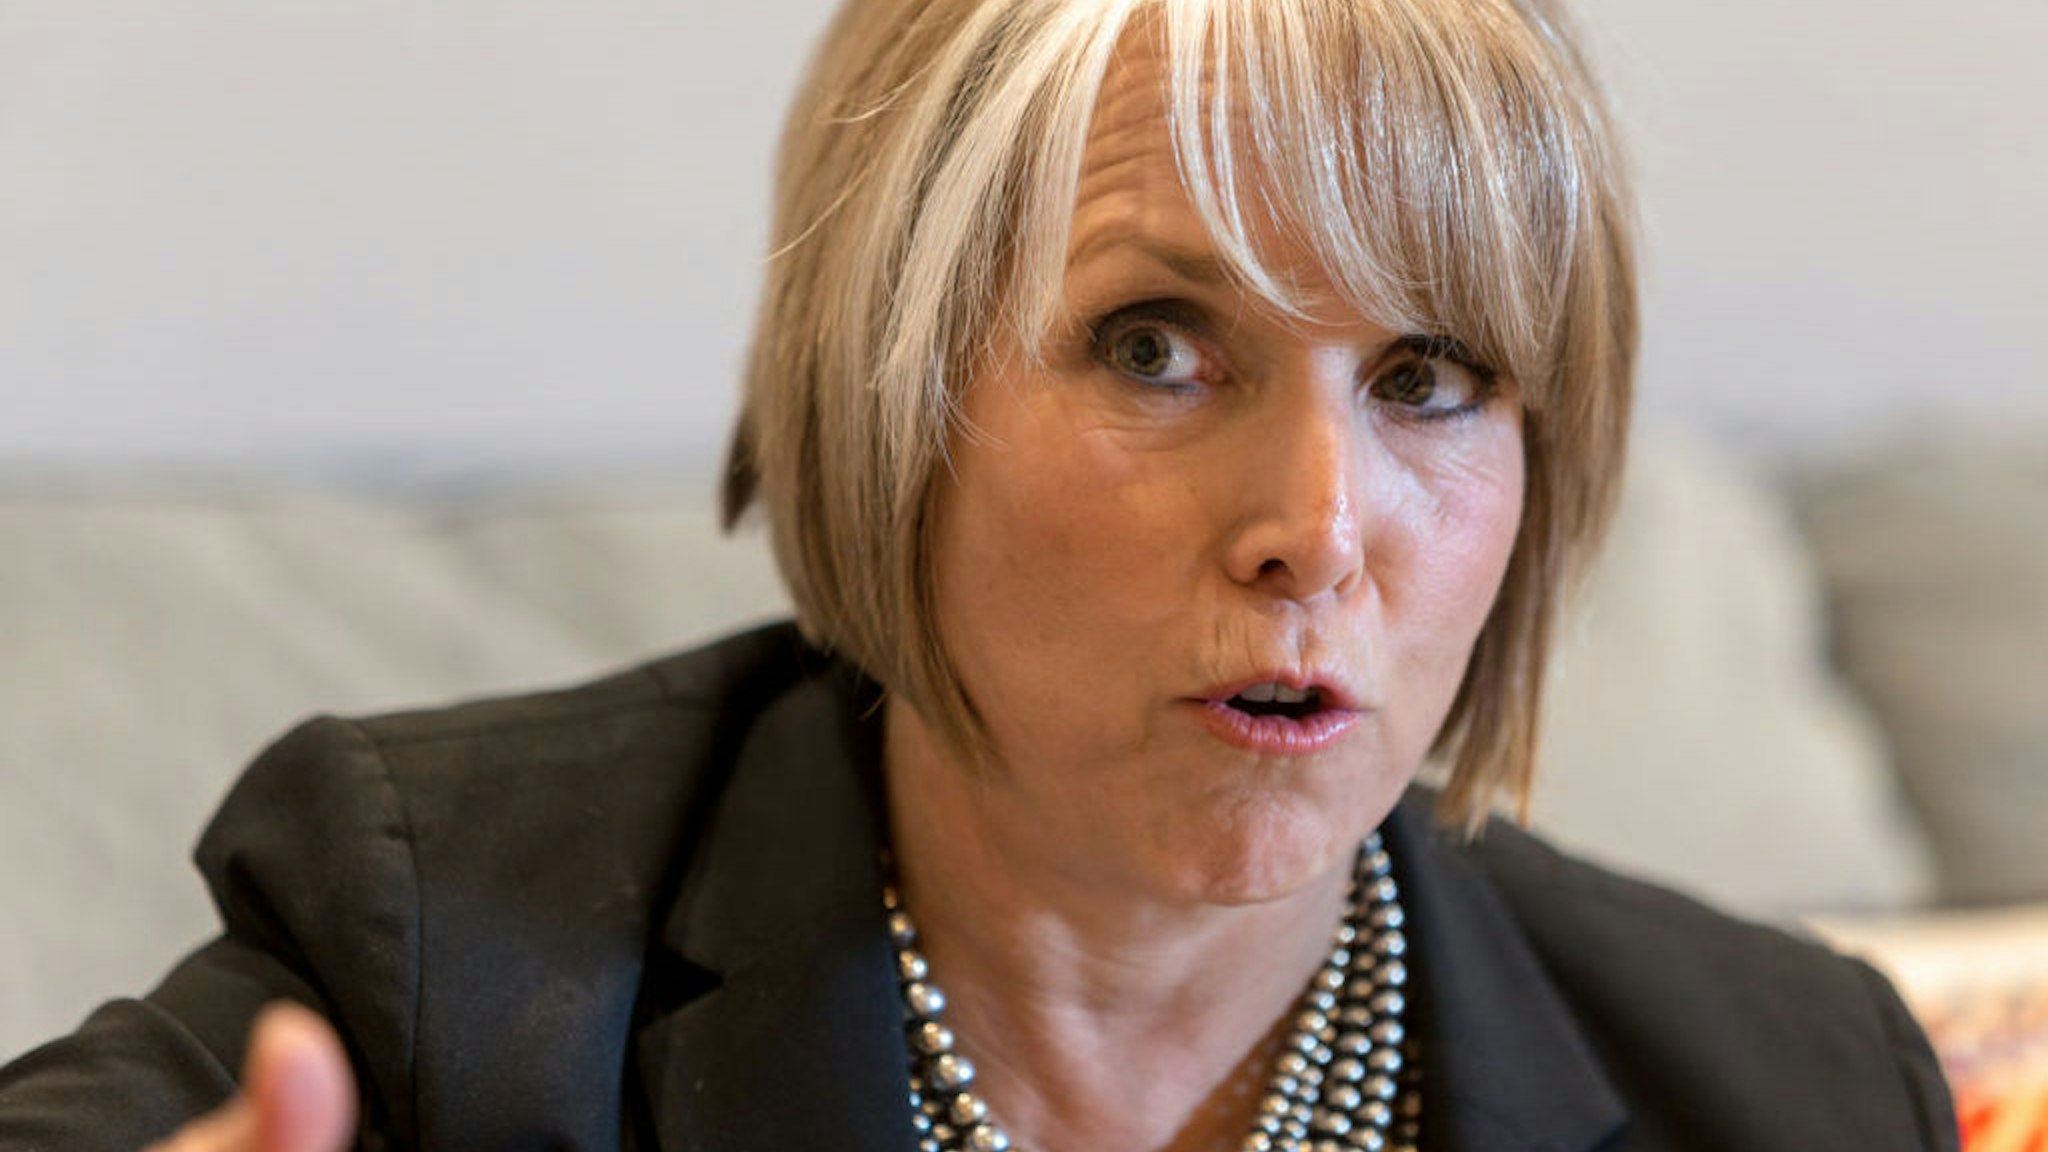 Michelle Lujan Grisham, governor of New Mexico, speaks during an interview at her office in Santa Fe, New Mexico, U.S., on Thursday, Aug. 8, 2019. Lujan Grisham is balancing her concern over the catastrophic effects of climate change with the state's extraordinary dependence on oil and gas. Photographer: Steven St John/Bloomberg